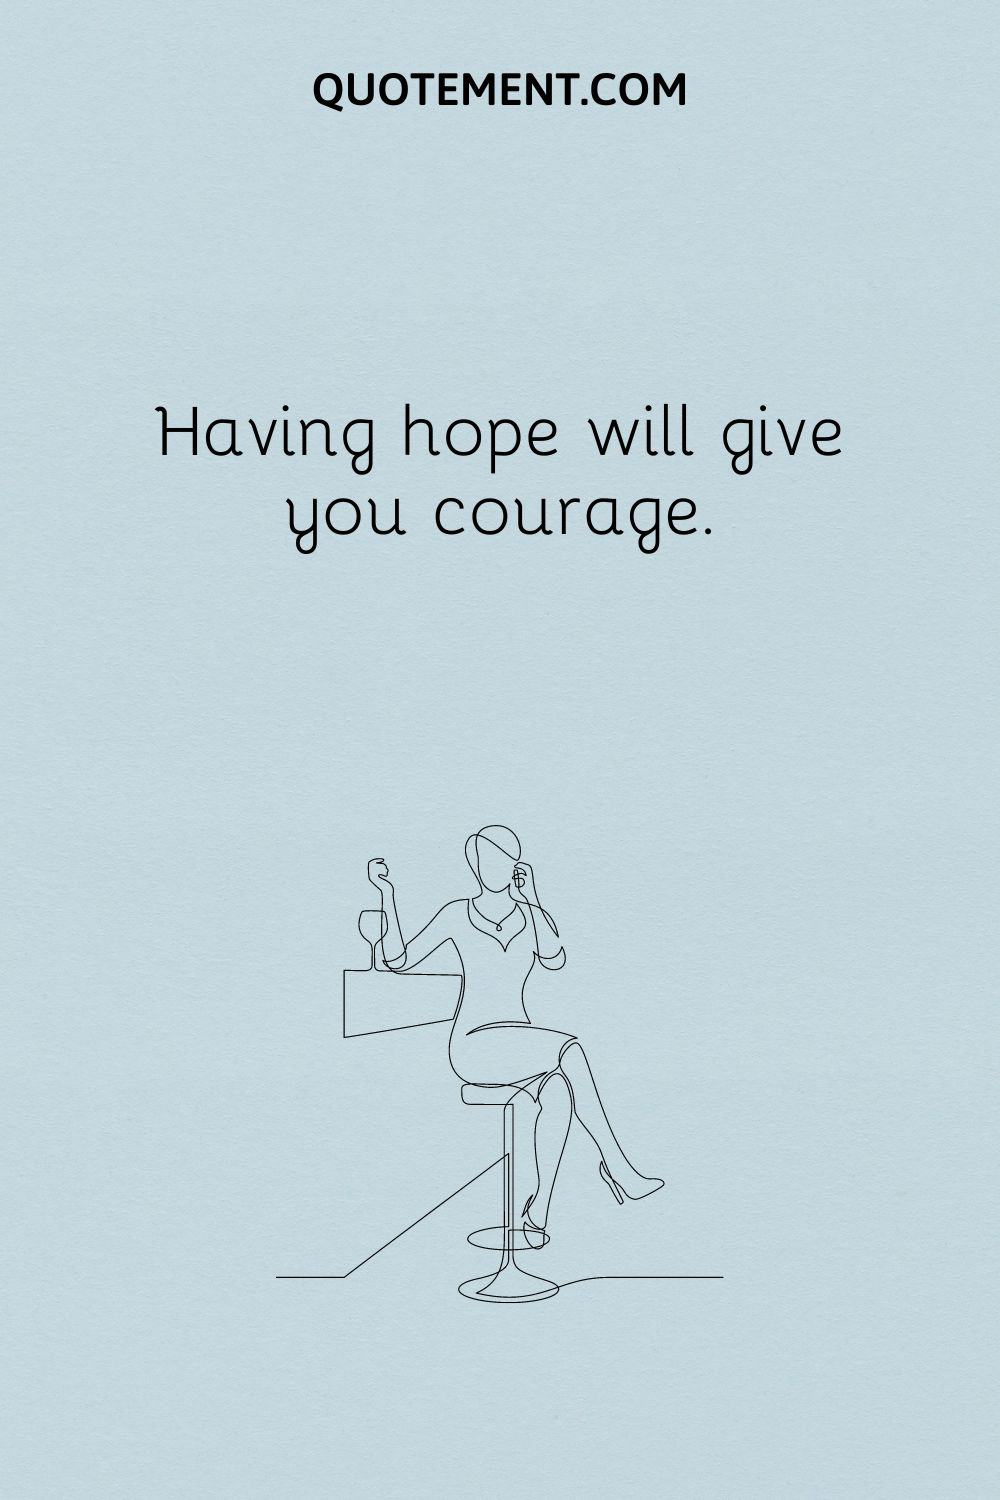 Having hope will give you courage.